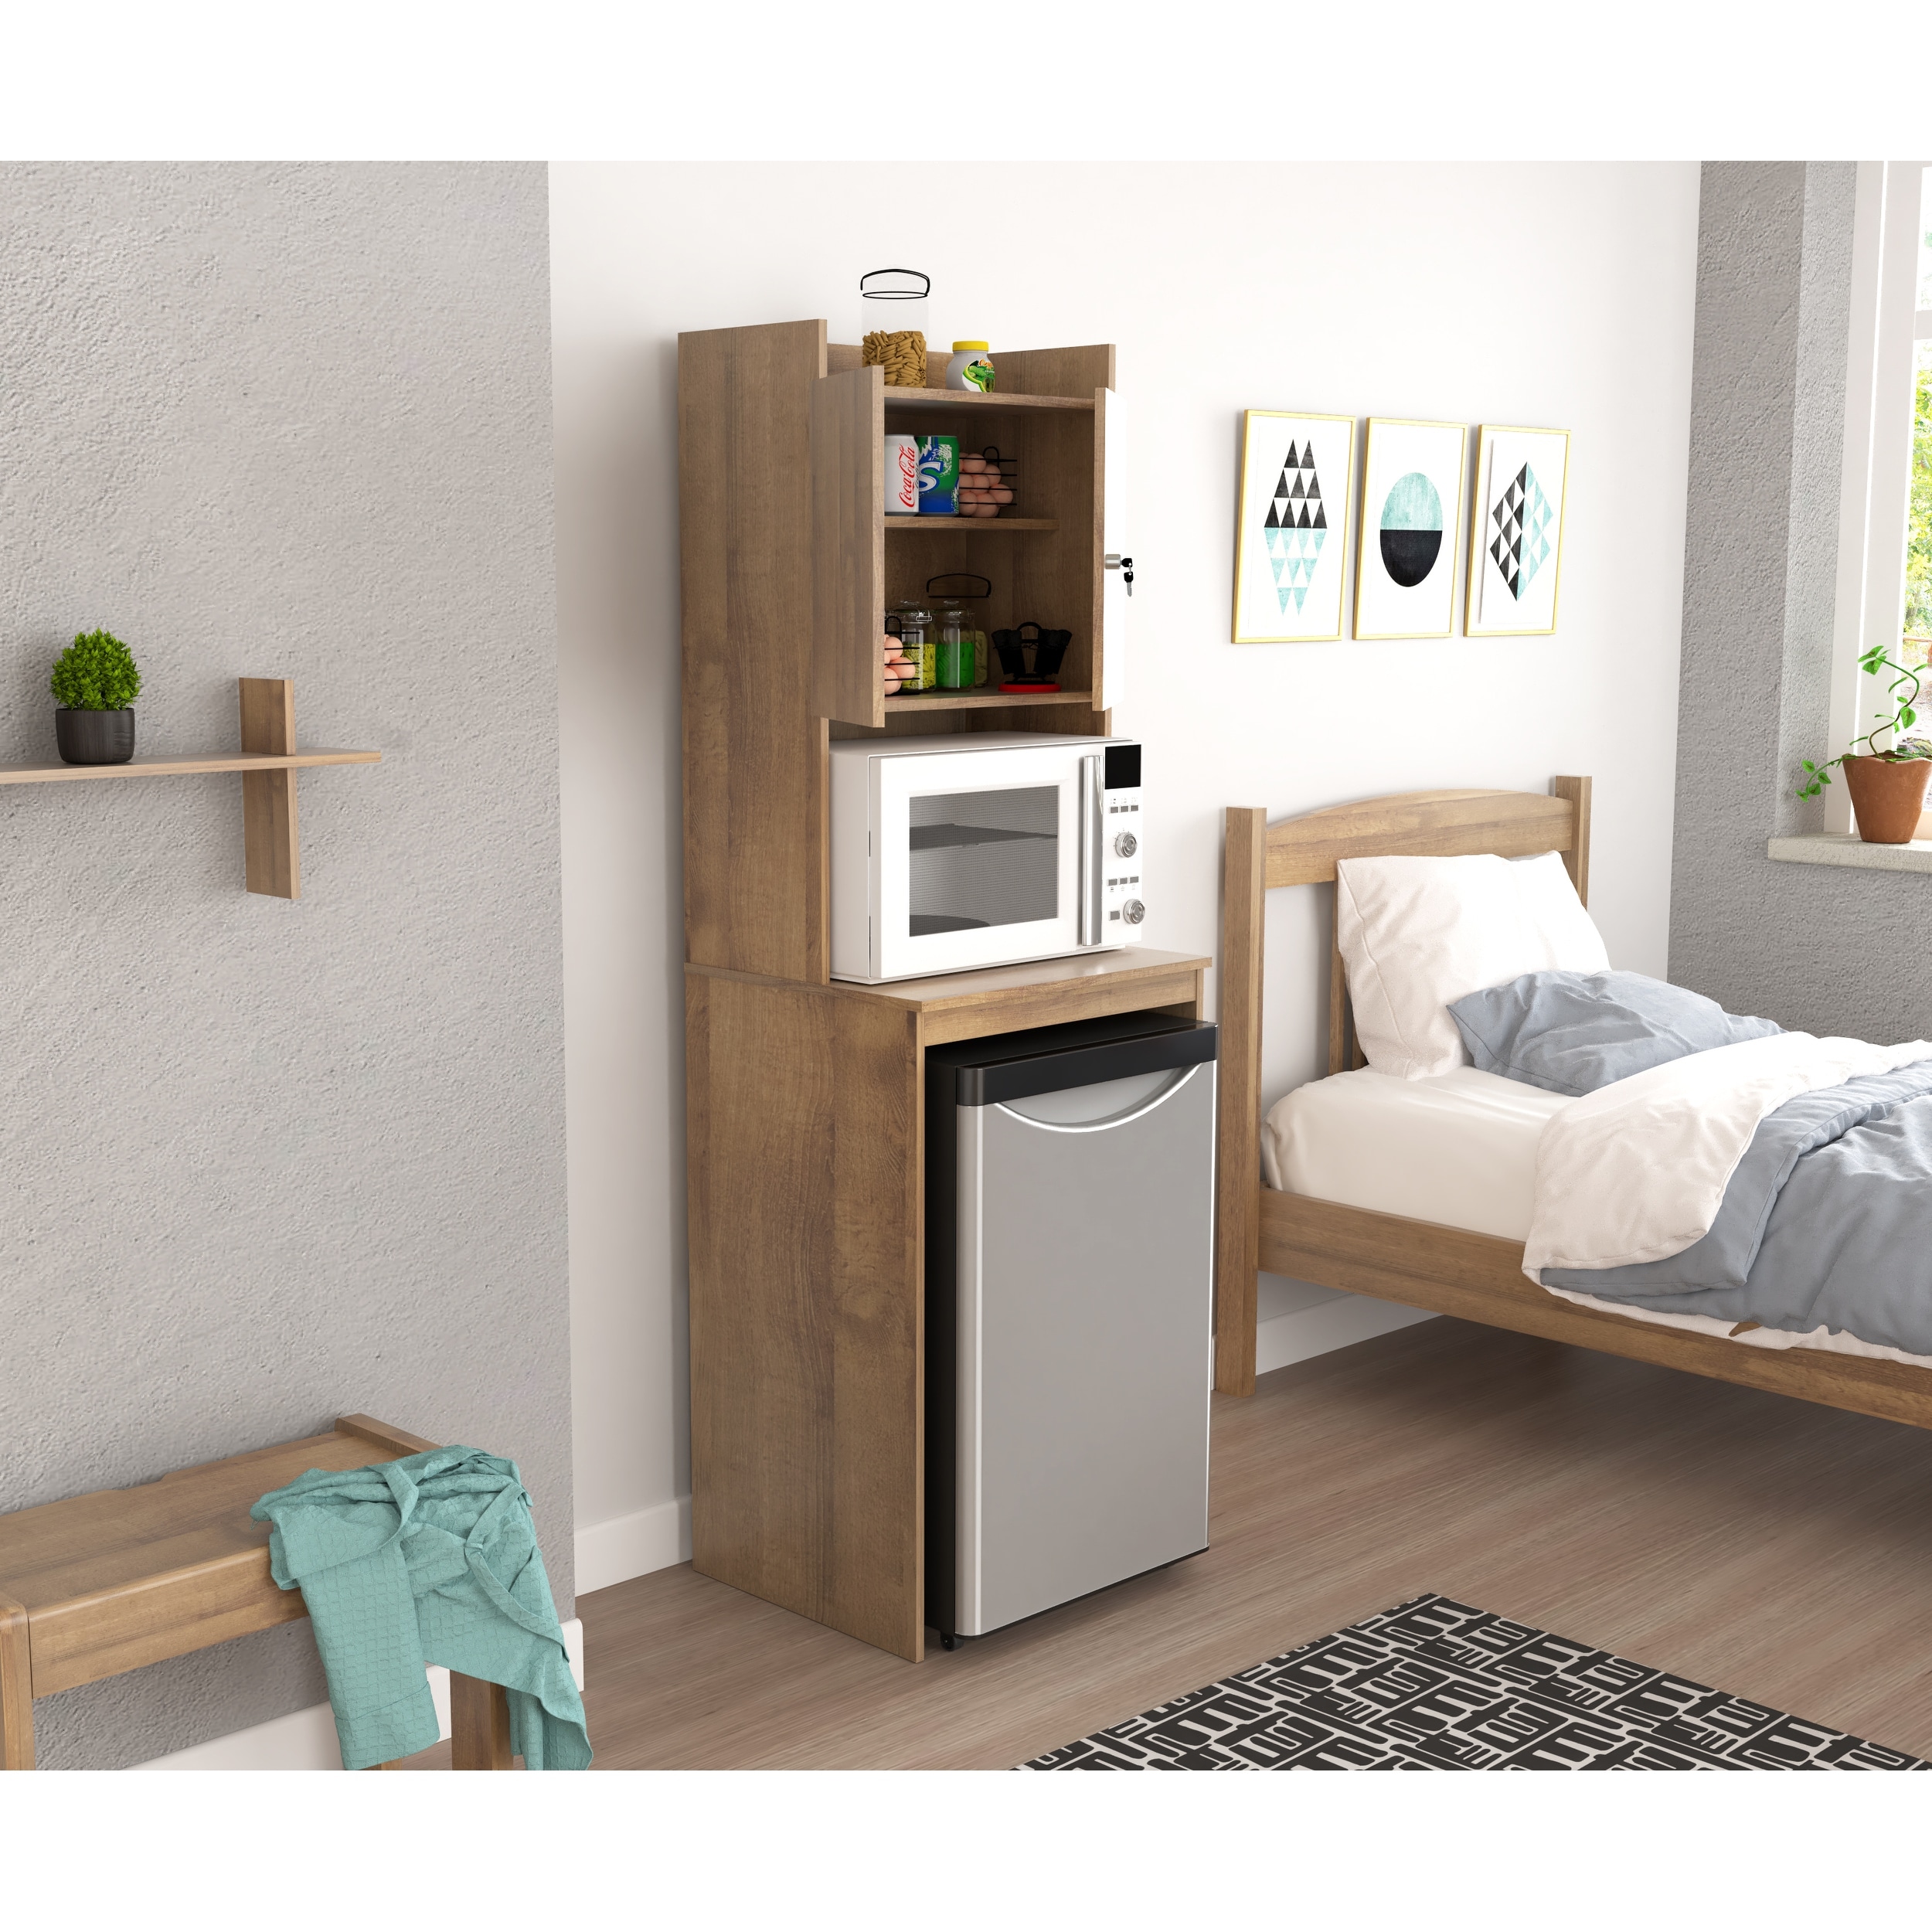 Cabinets With Mini Fridge & Microwave Flanked By Taupe Built In Bink Beds  Design Ideas